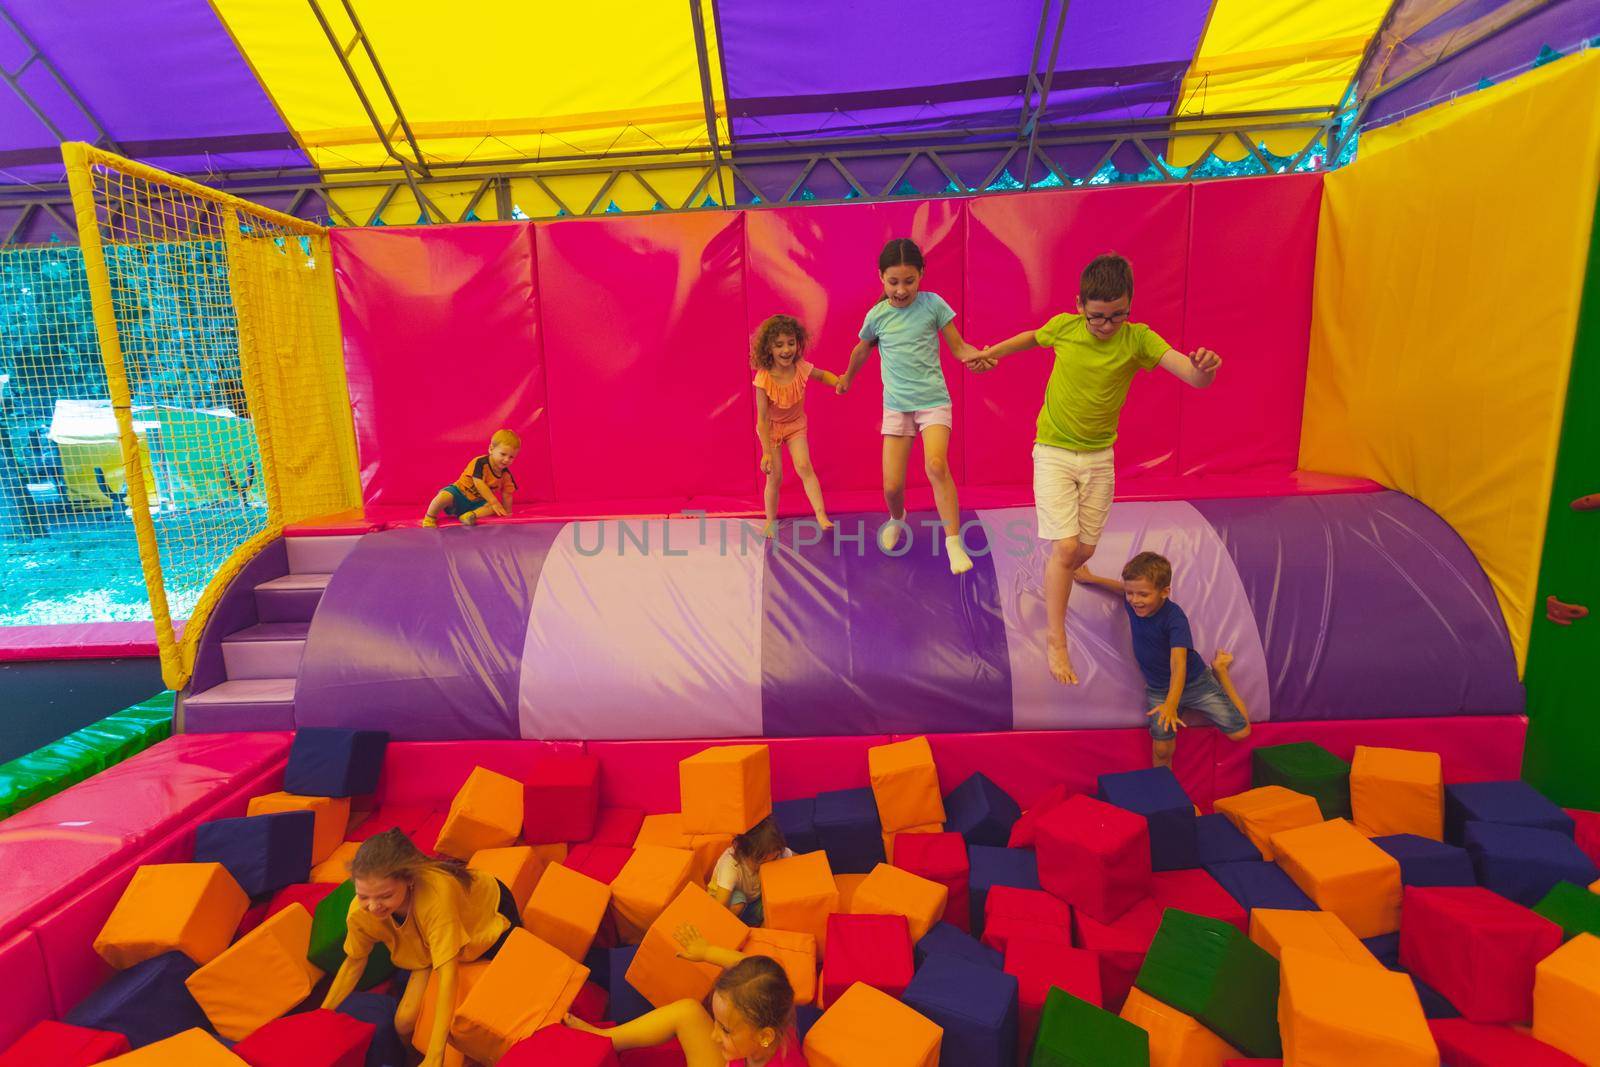 The children have a great time together in the trampoline park by oksix